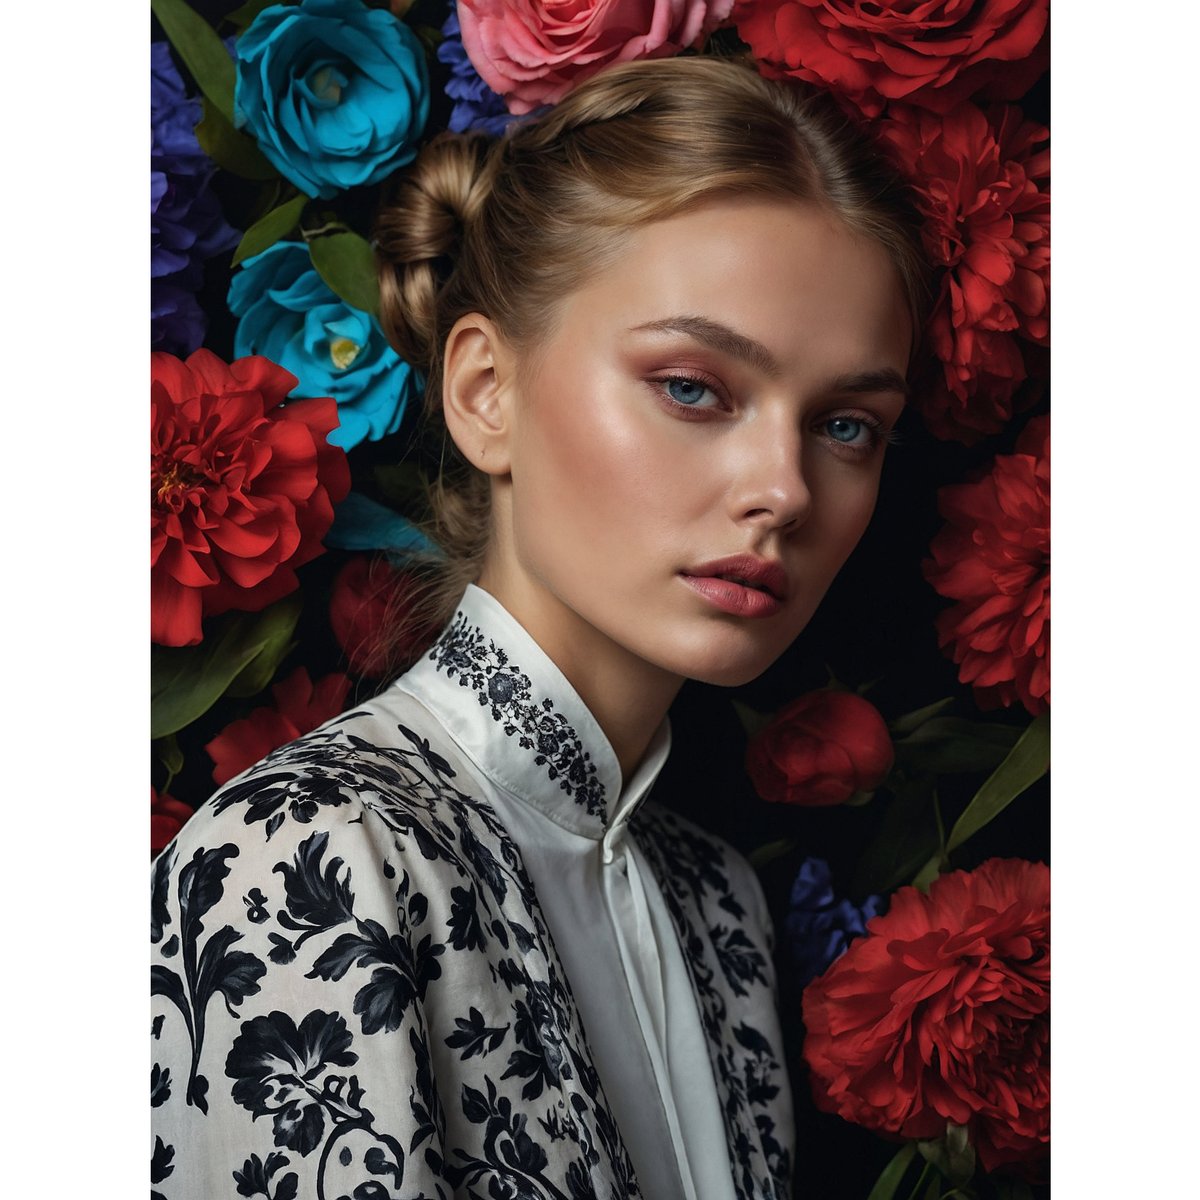 ✨ Experience timeless elegance in this stunning Vogue cover portrait! 💐👸 This young Russian model shines against a classic backdrop, her beauty enhanced by floral accents and Victorian-inspired attire. 📸✨ #FashionIcon #VintageCharm #VogueCover #leonardoai #magnificai 🌟